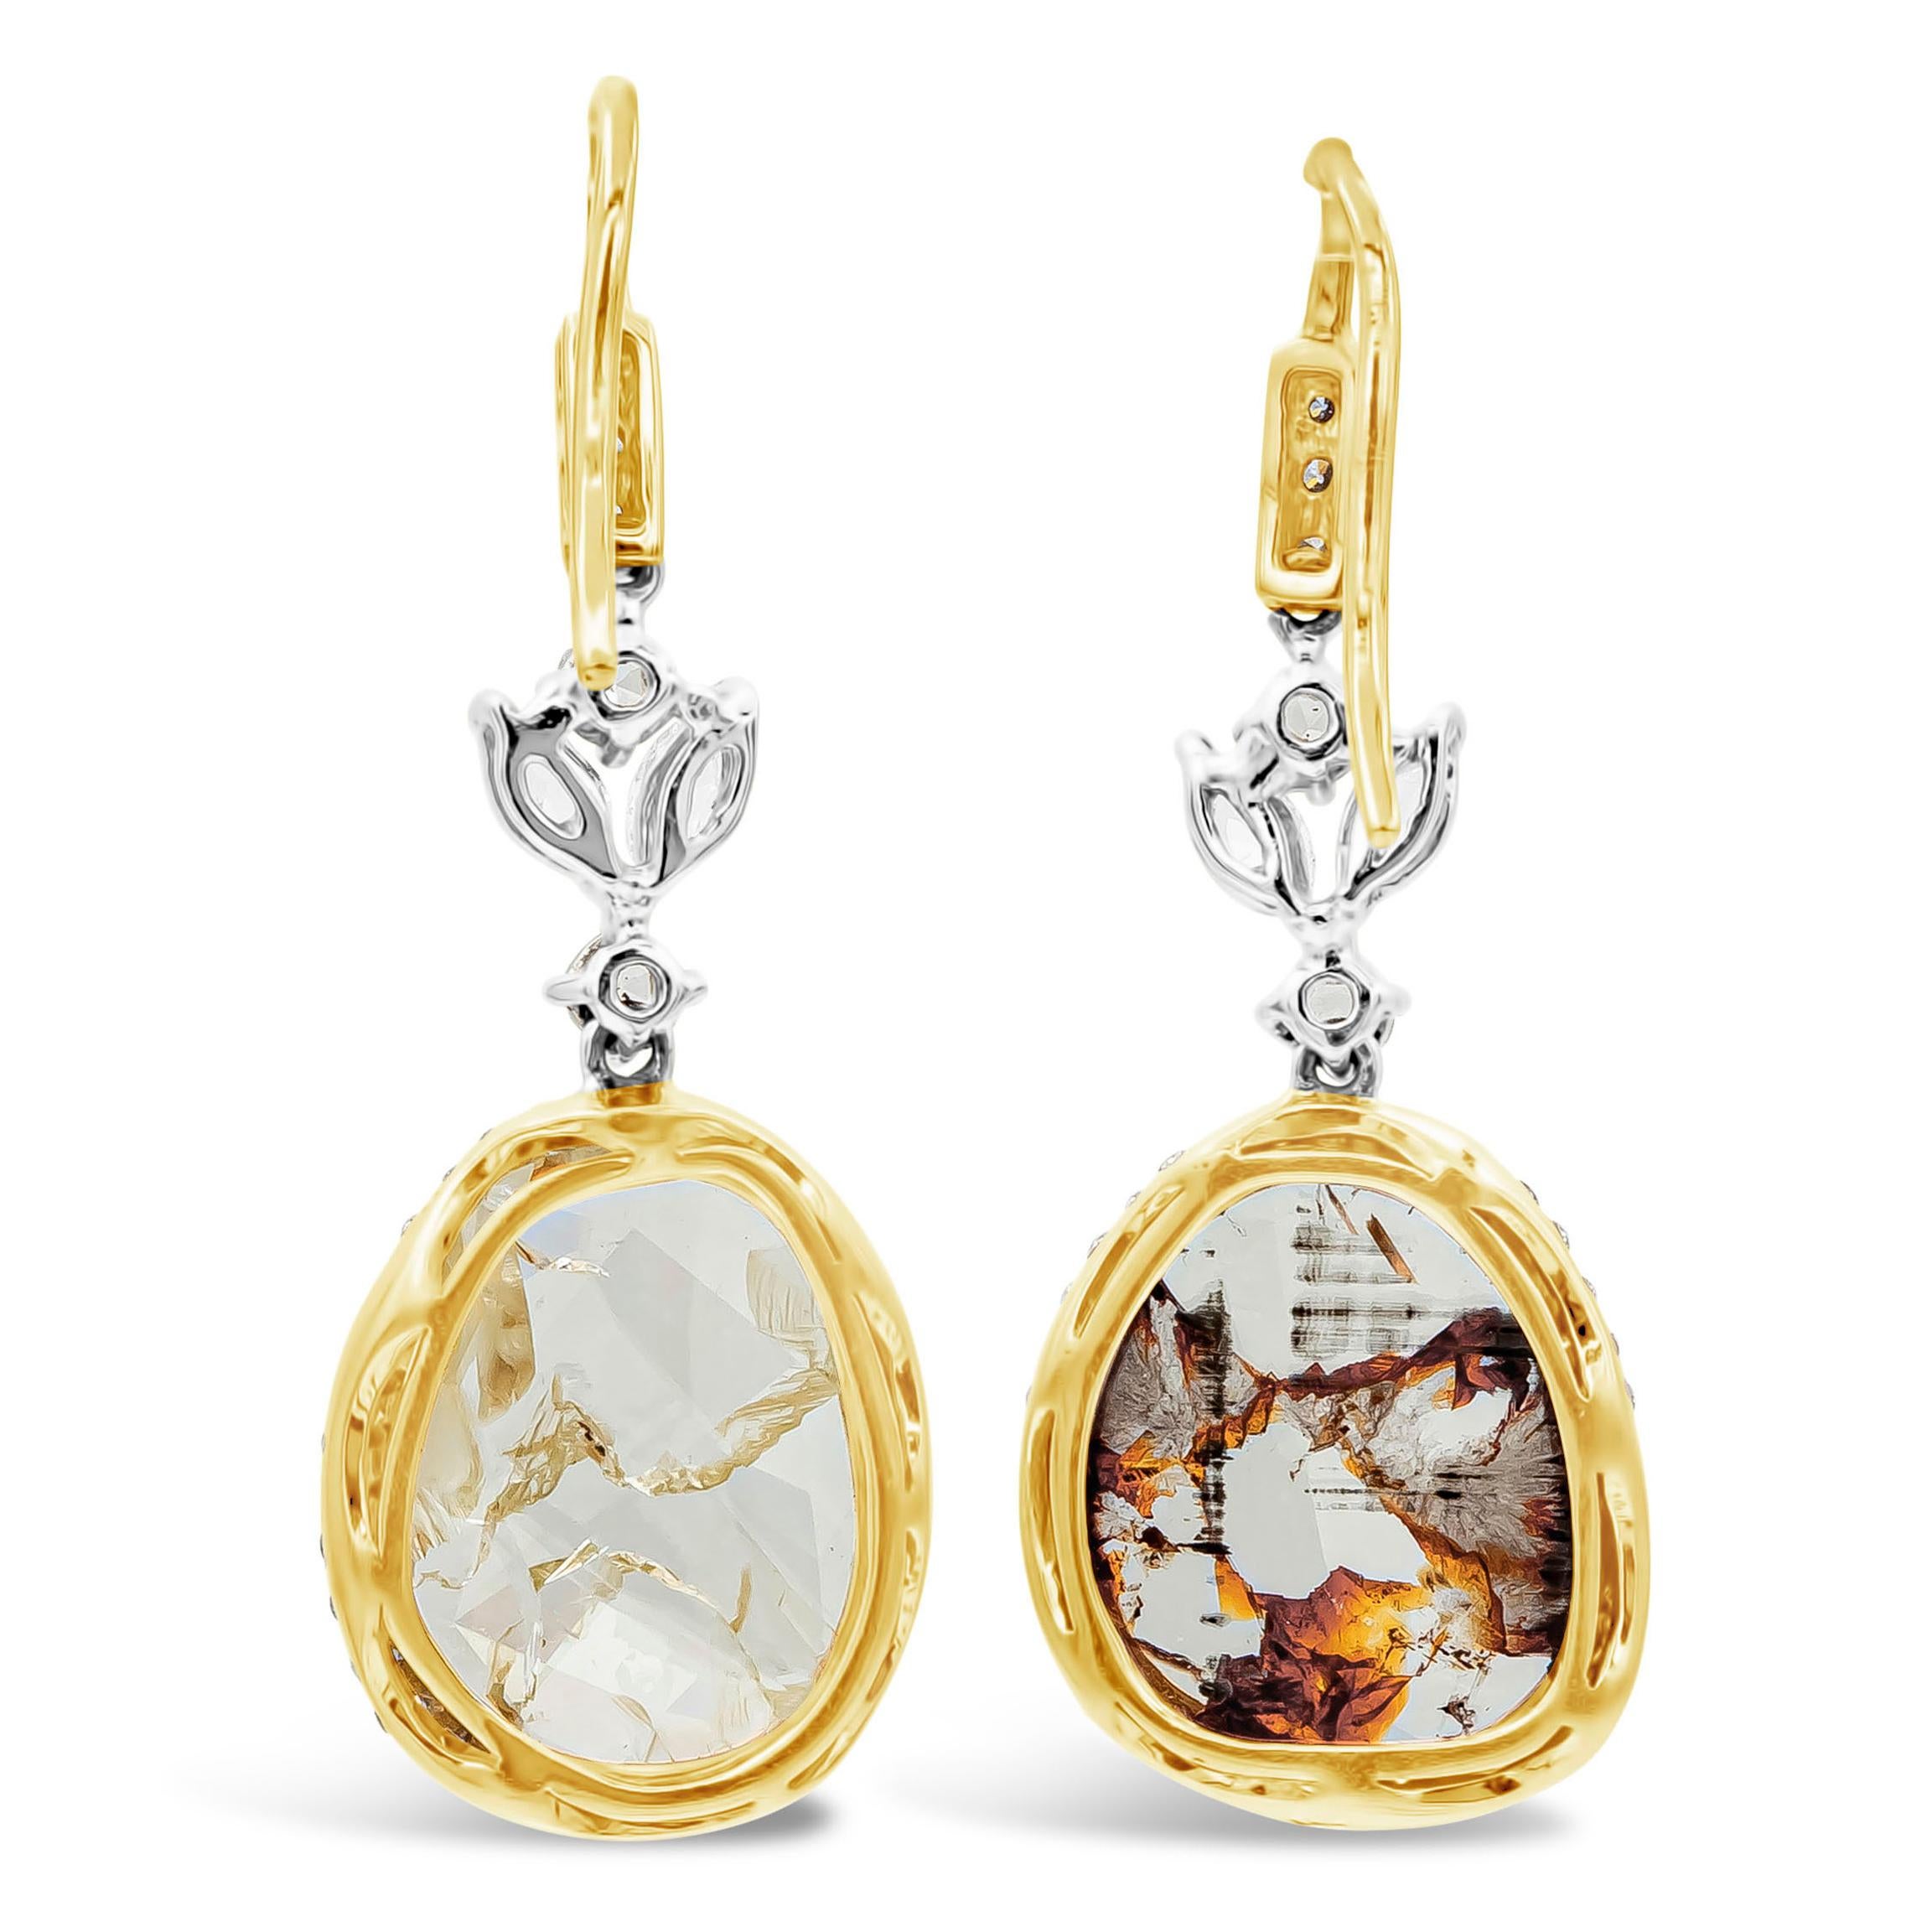  A beautiful, special and intricately-designed pair of dangle earrings showcasing an 18K tricolored design, set with diamond slices weighing a total of 4.22 carats and a brilliant round diamonds that weighs 1.05 carats total.

Roman Malakov is a